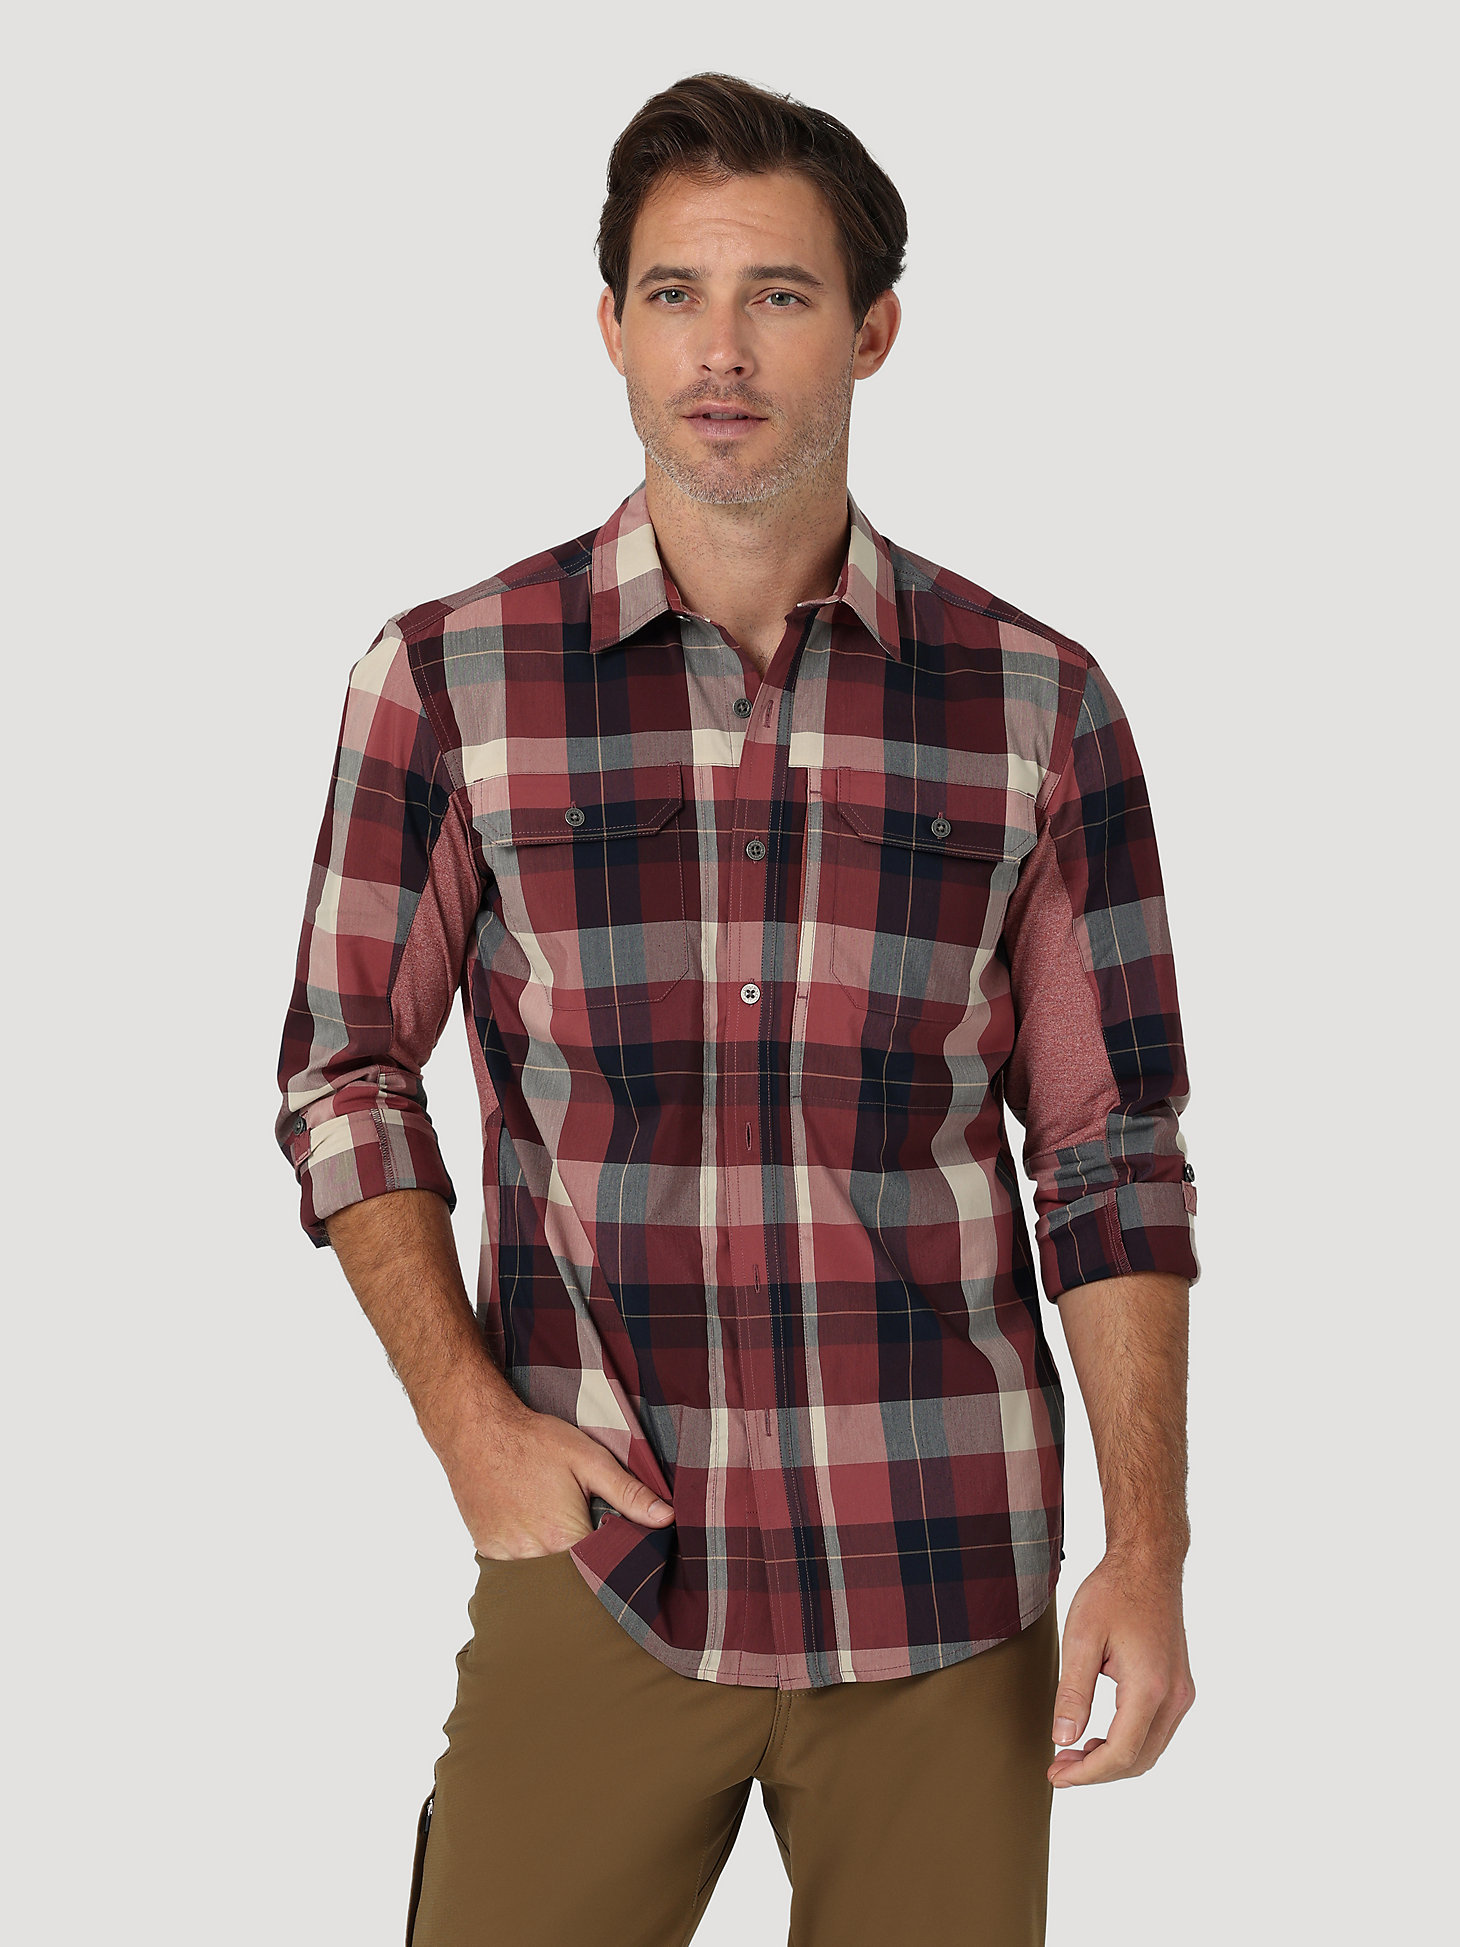 ATG By Wrangler™ Plaid Mixed Material Shirt in Beagle Apple Butter alternative view 2